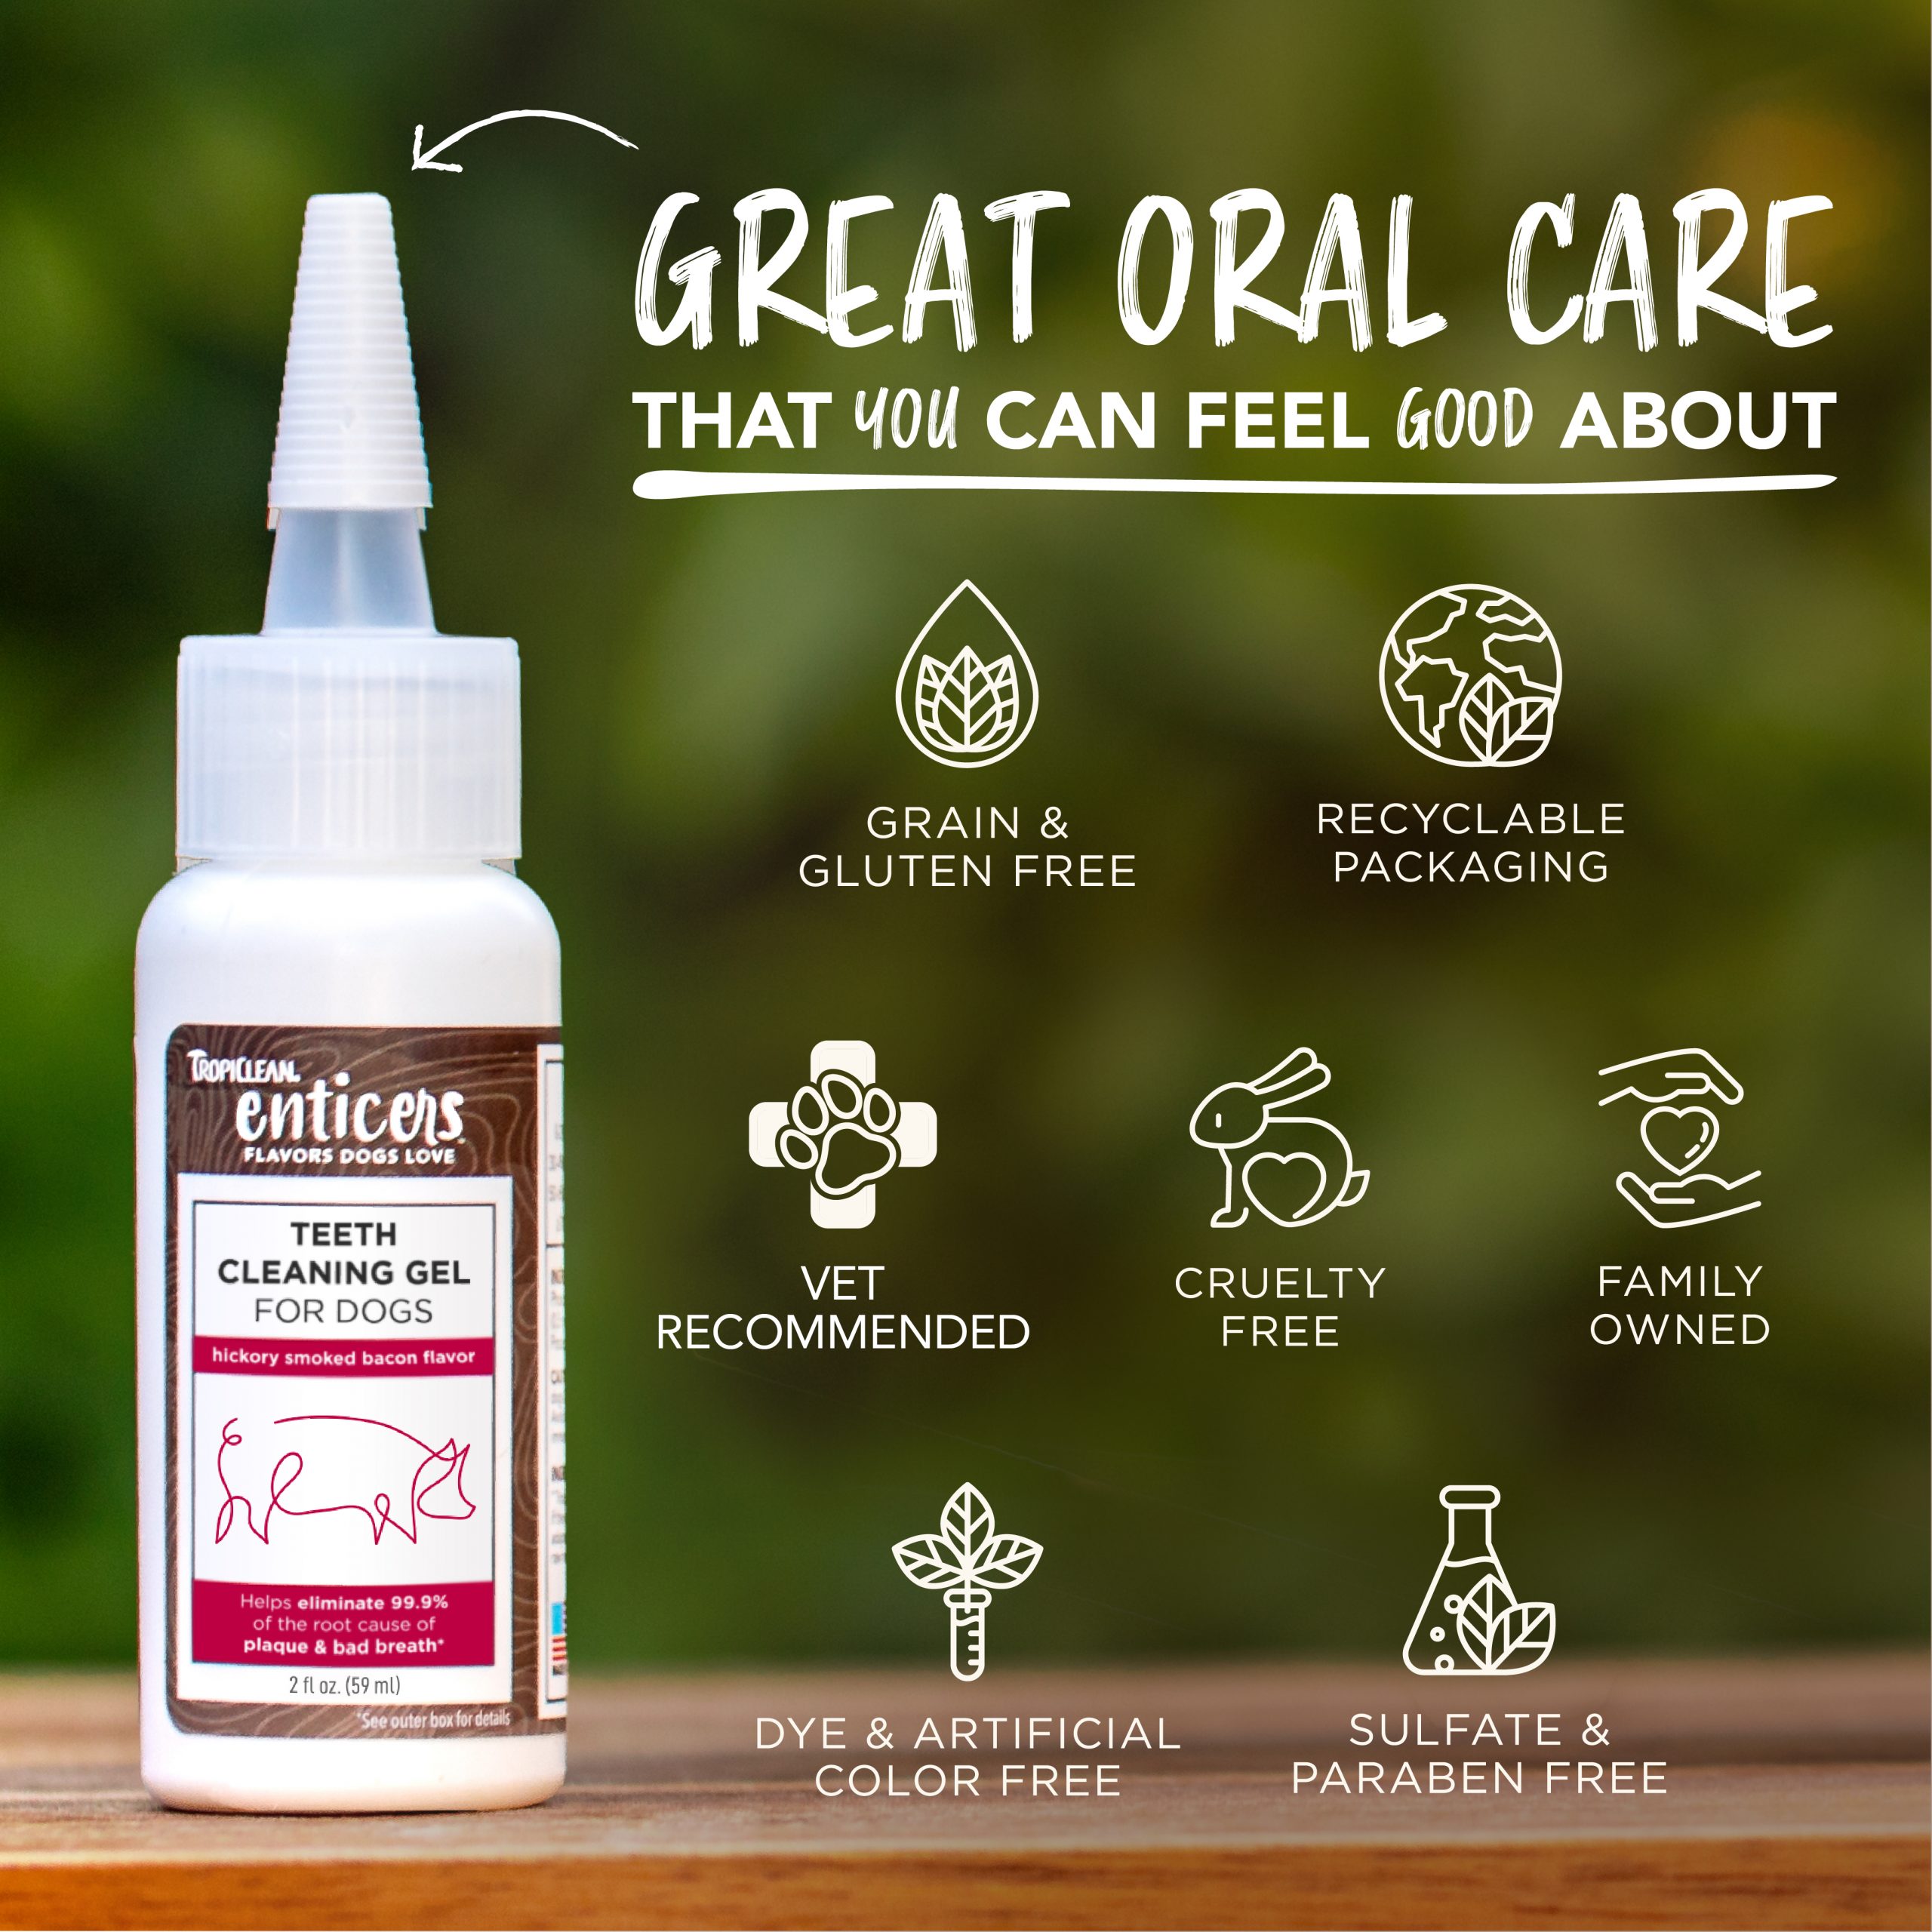 Teeth Cleaning Gel for Dogs – Hickory Smoked Bacon Flavor